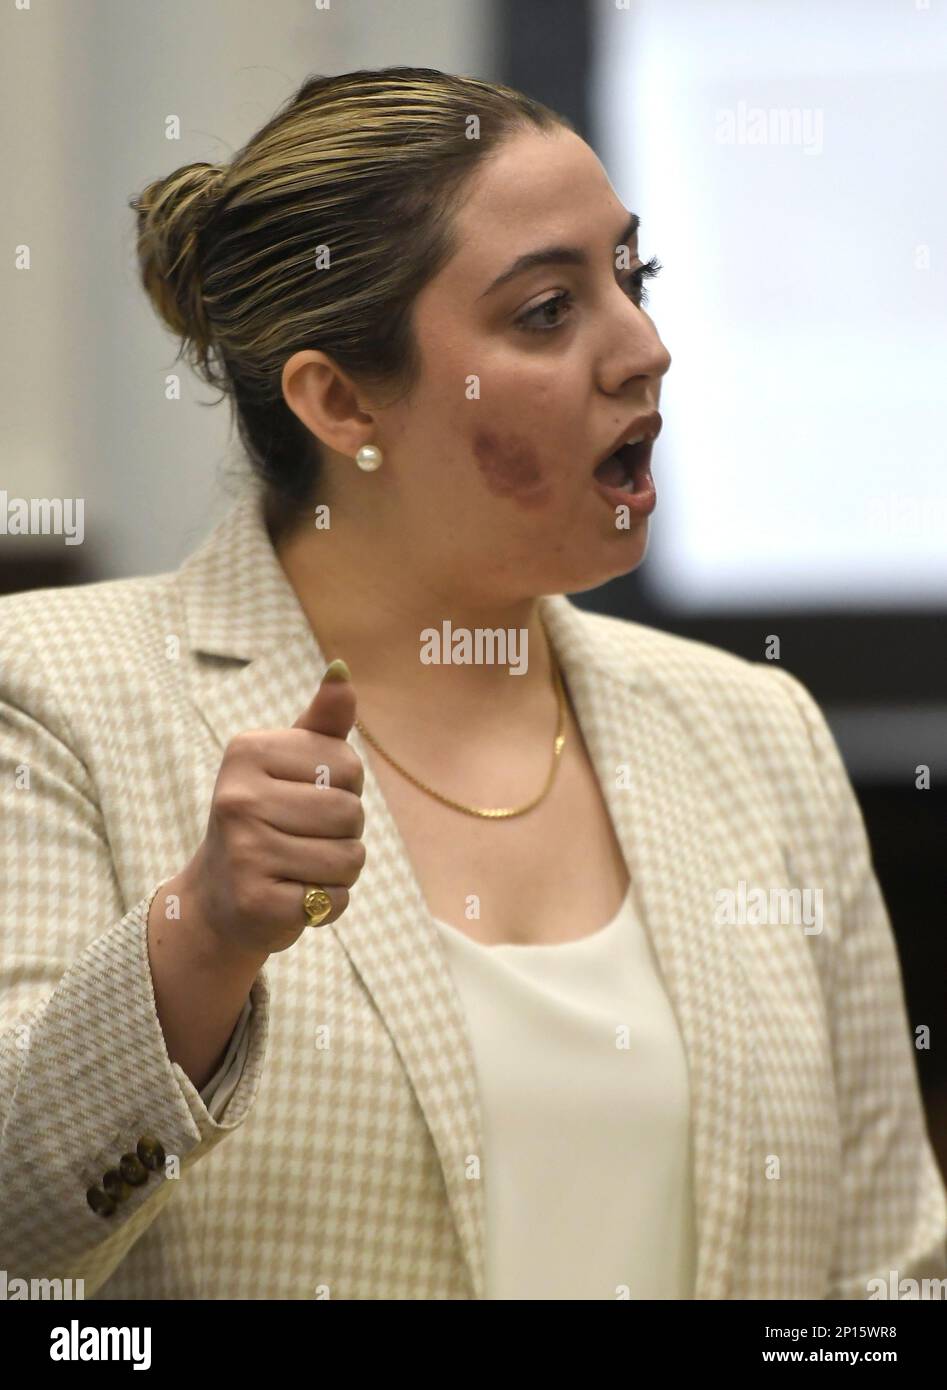 Nicole Muller, an attorney for Zachariah Anderson, gives the defense's opening statement during Anderson's trial at the Kenosha County Courthouse in Kenosha, Wis., on Thursday, Feb. 2, 2023. (Sean Krajacic/The Kenosha News via AP) Stock Photo